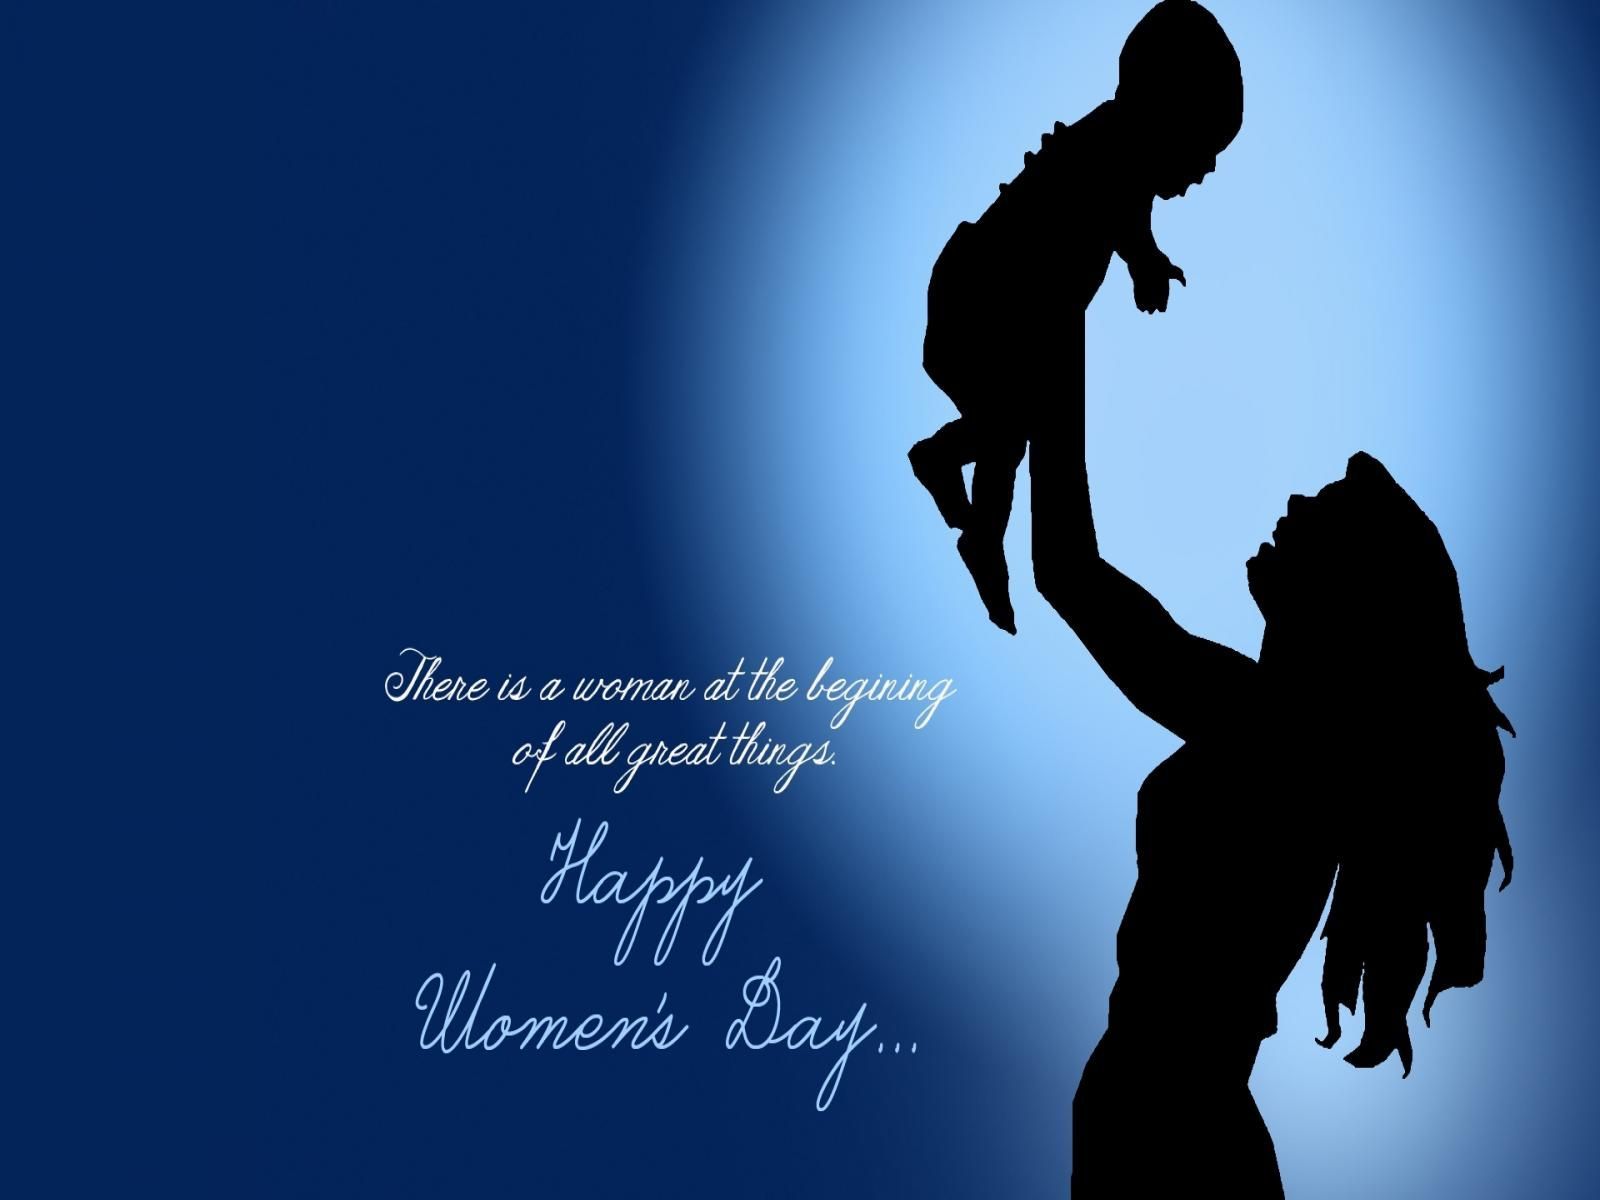 Happy womens day quotes.com